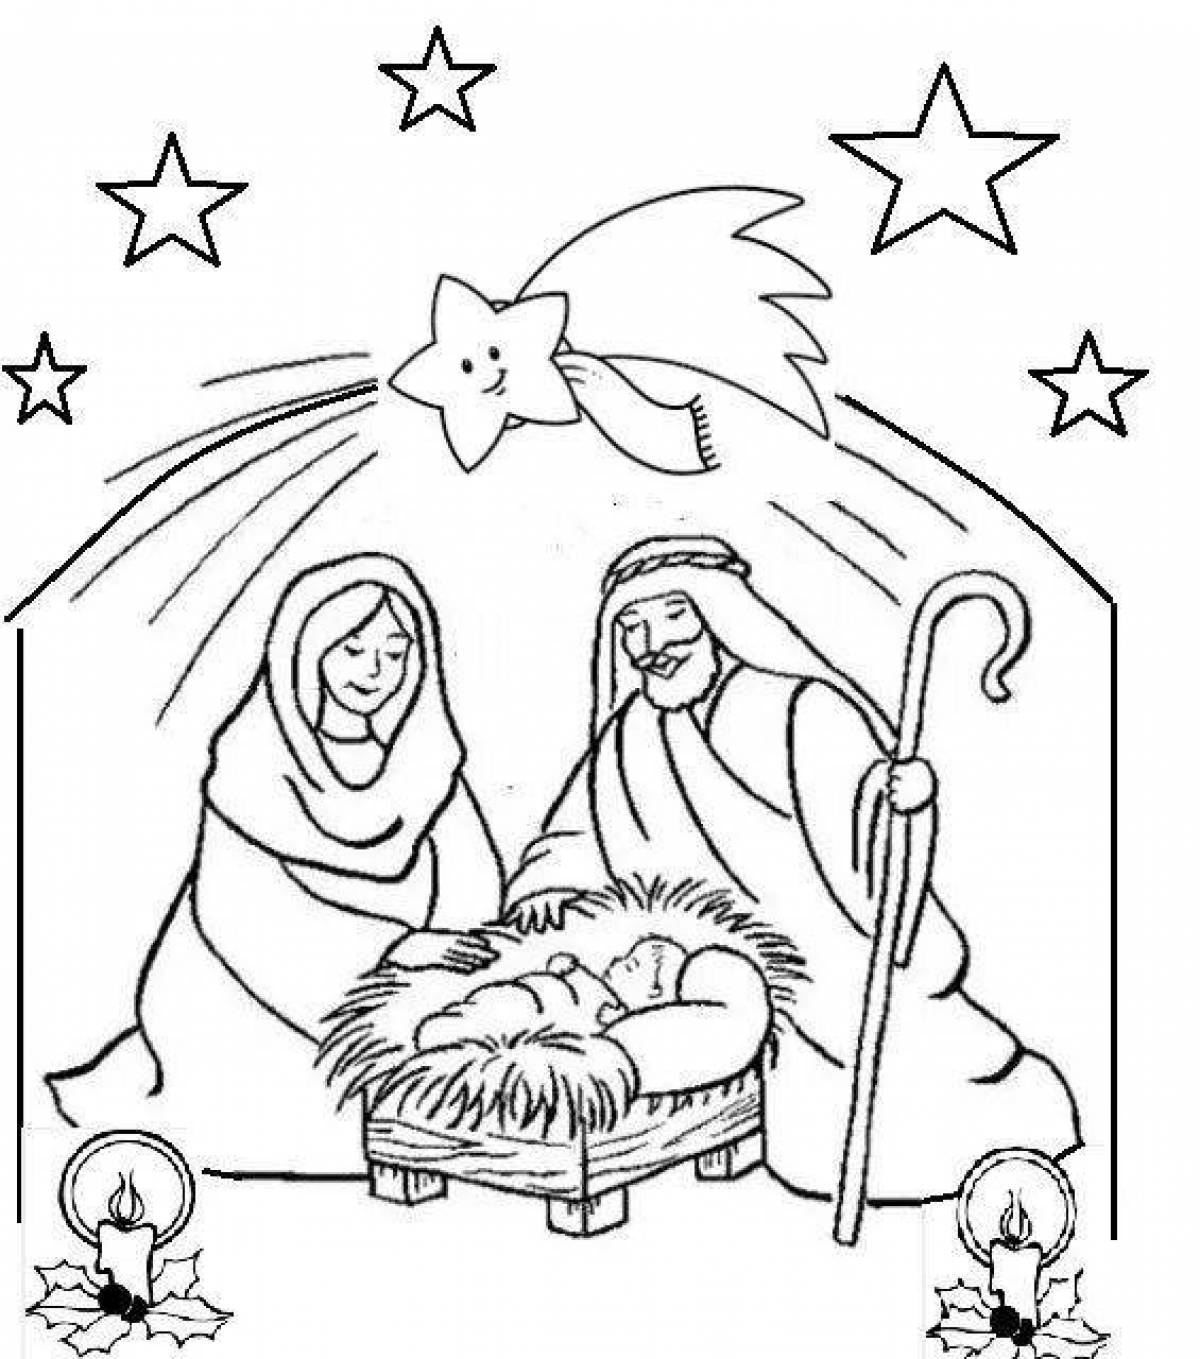 Impeccable star of bethlehem coloring